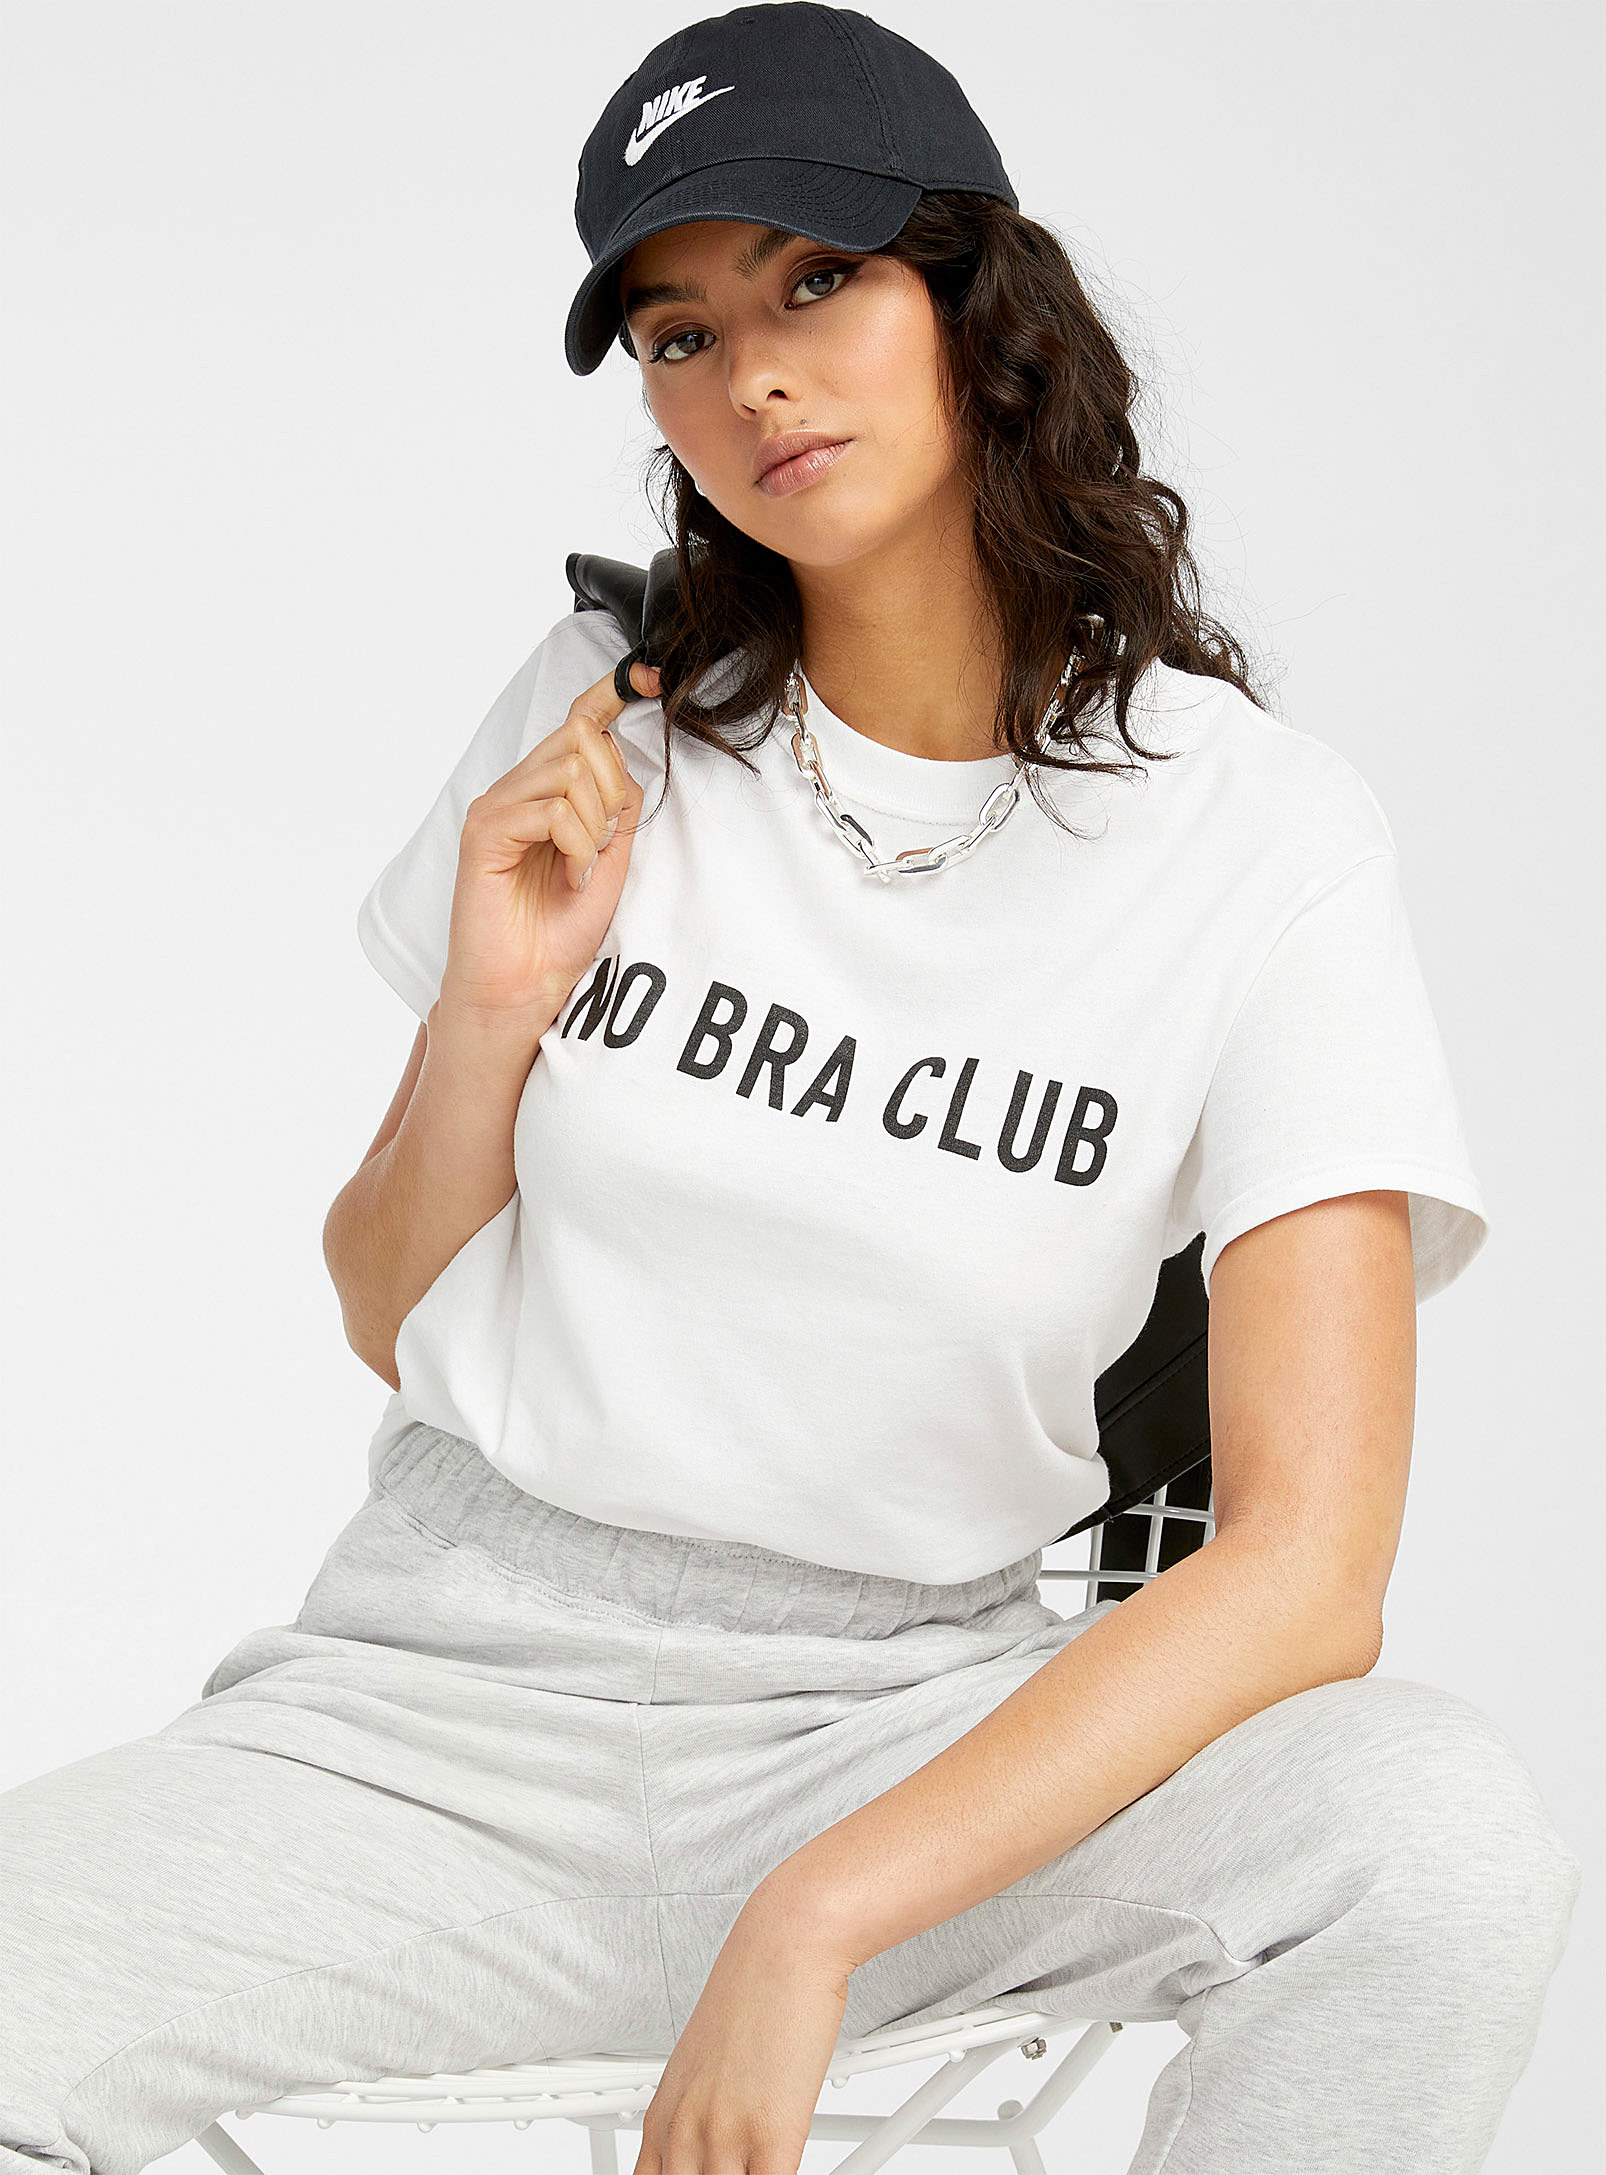 A person wearing a T-shirt that says no bra club